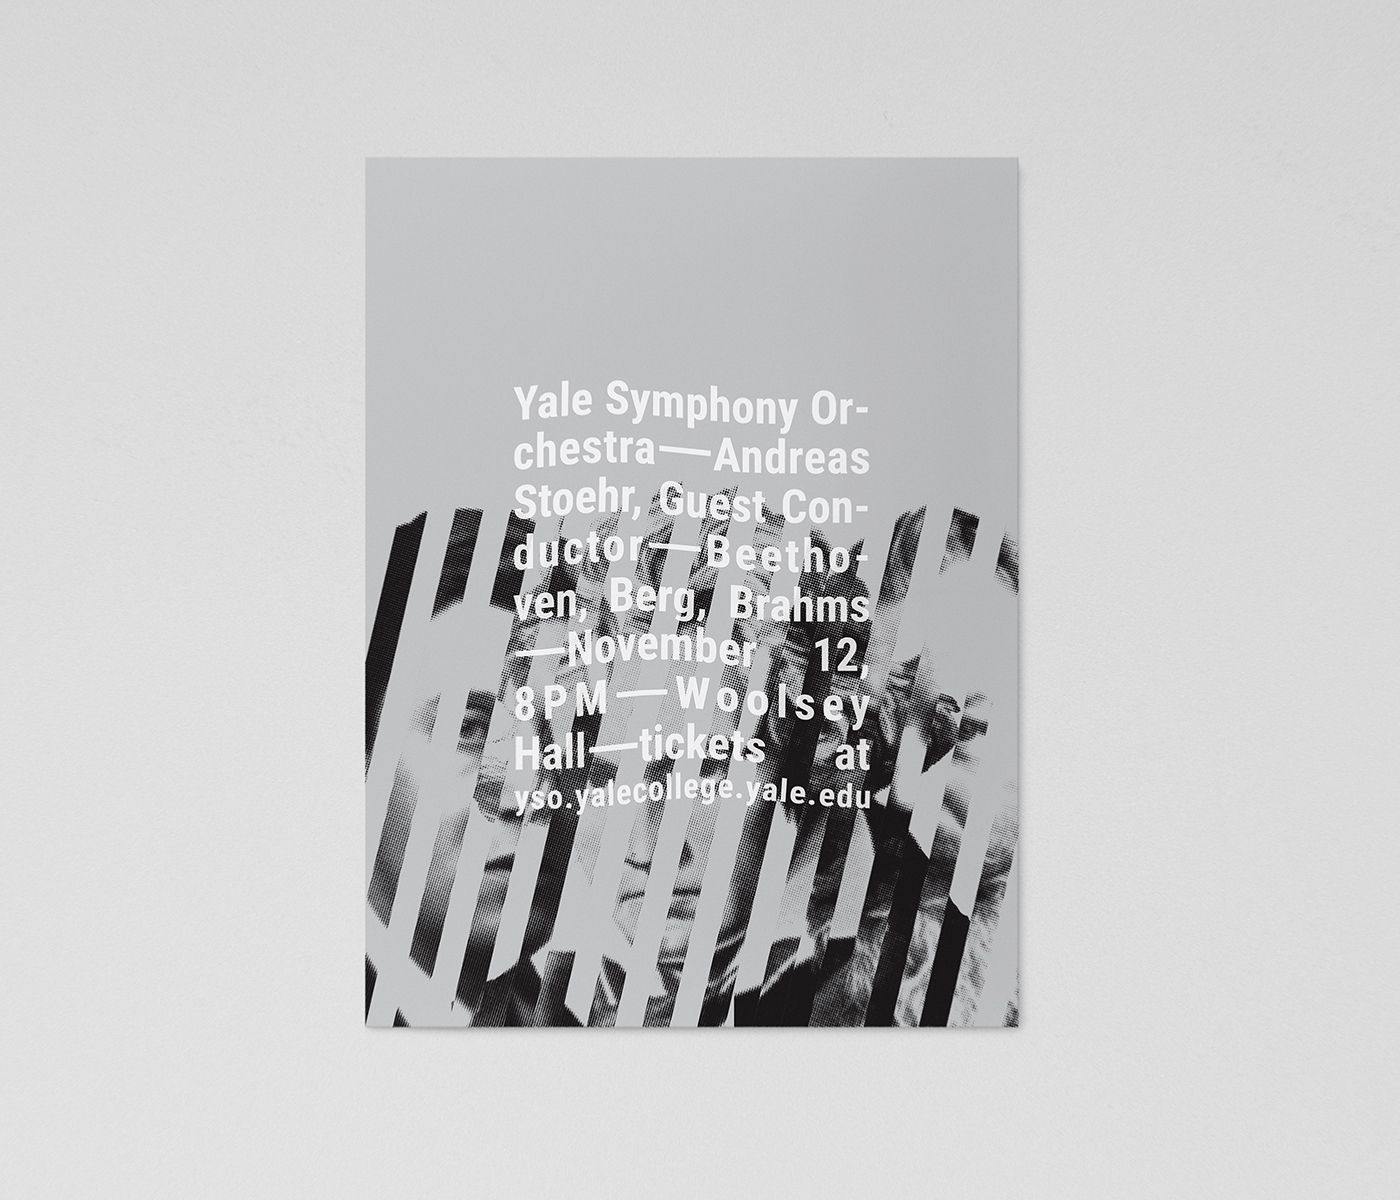 Minimalist modern poster design for The Yale Symphony Orchestra’s concert Three Viennese Bees: collaged images of Beethoven, Berg, and Brahms on a gray background, overlaid with wavy white typography.